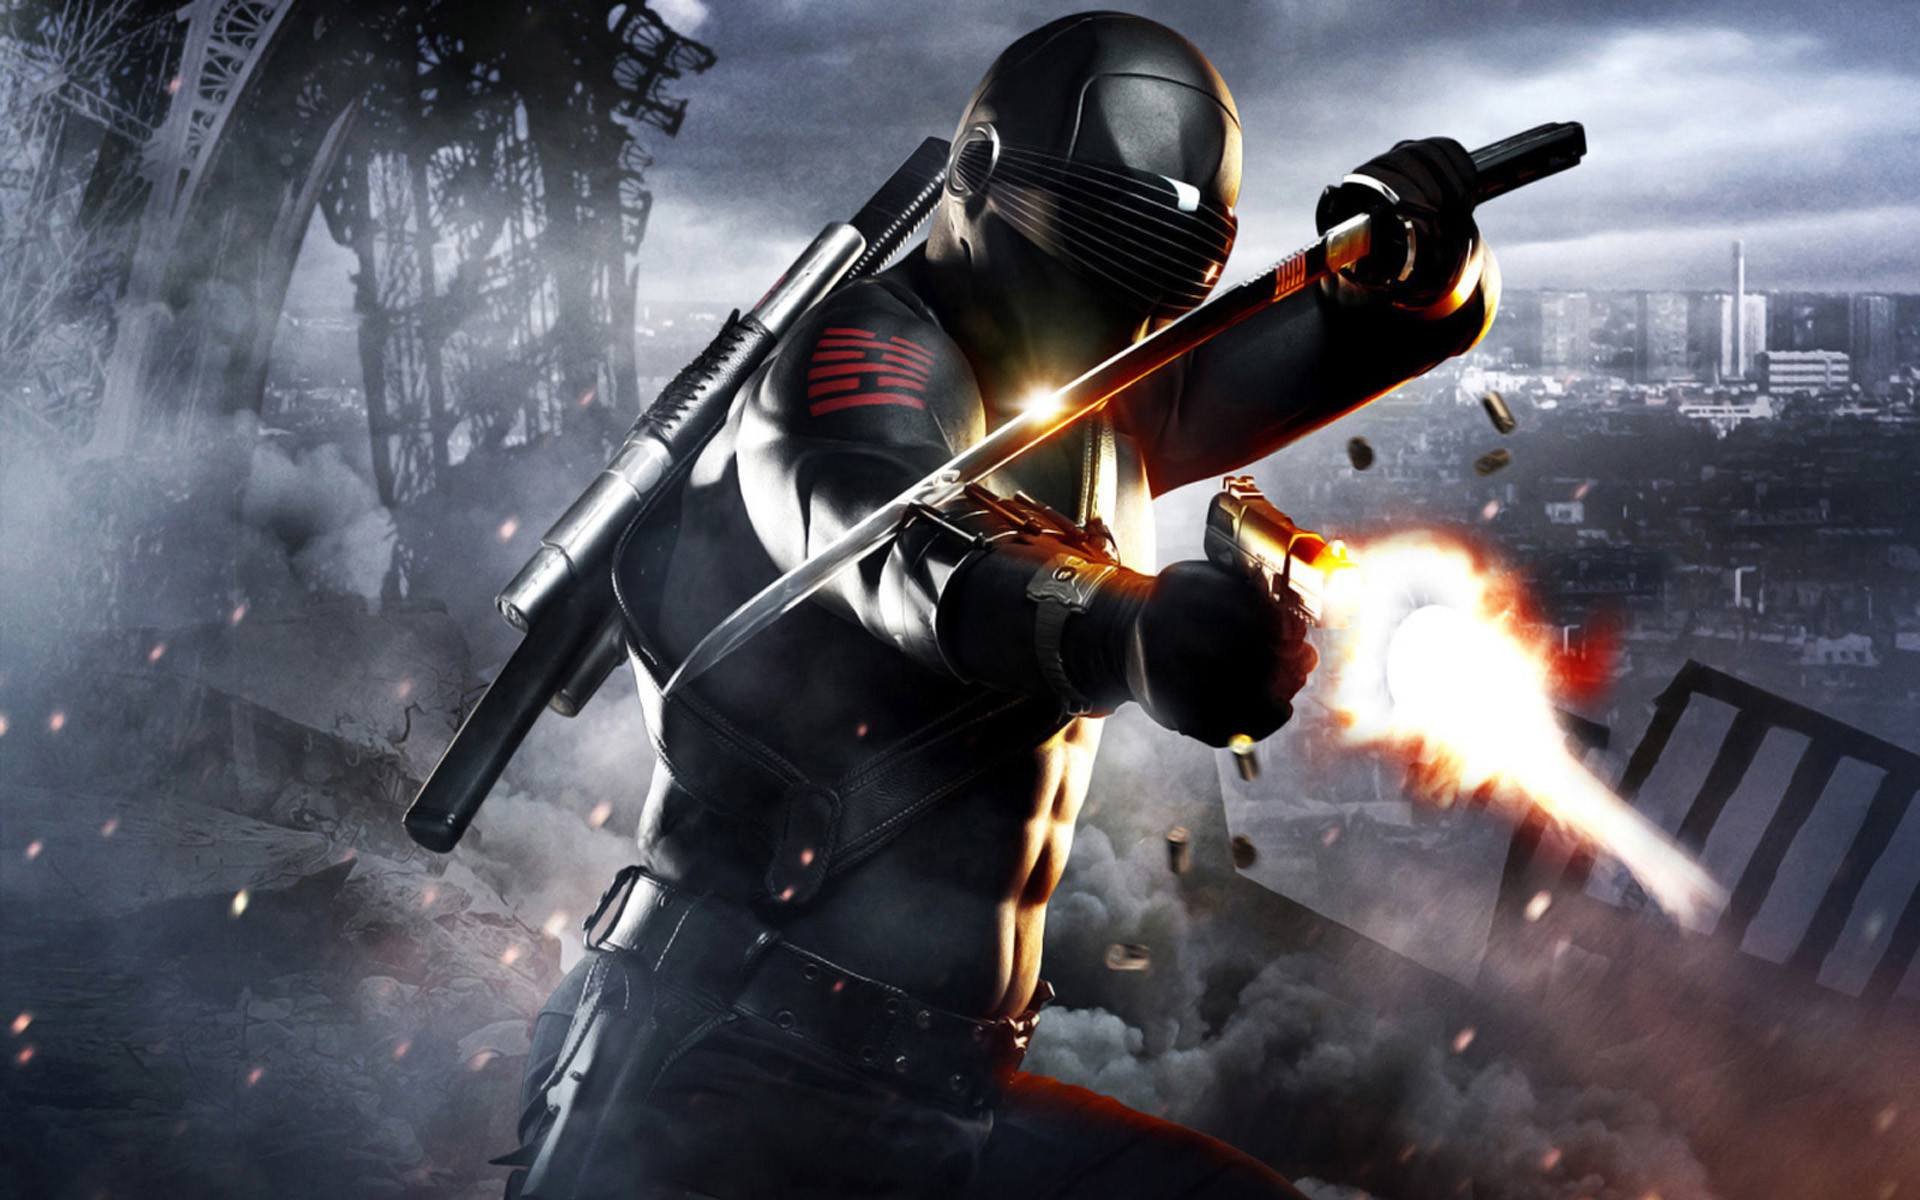 snake eyes wallpaper,action adventure game,shooter game,pc game,games,strategy video game